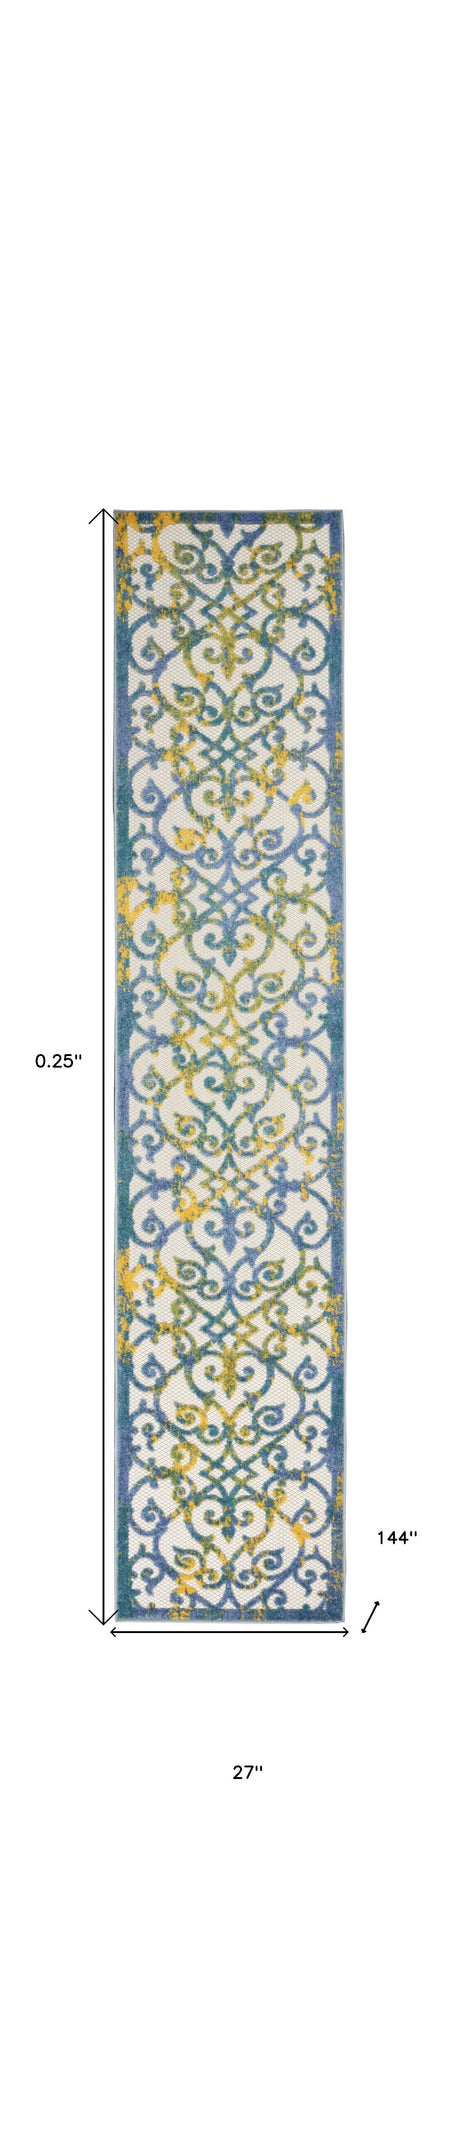 2' X 12' Ivory And Blue Damask Non Skid Indoor Outdoor Runner Rug